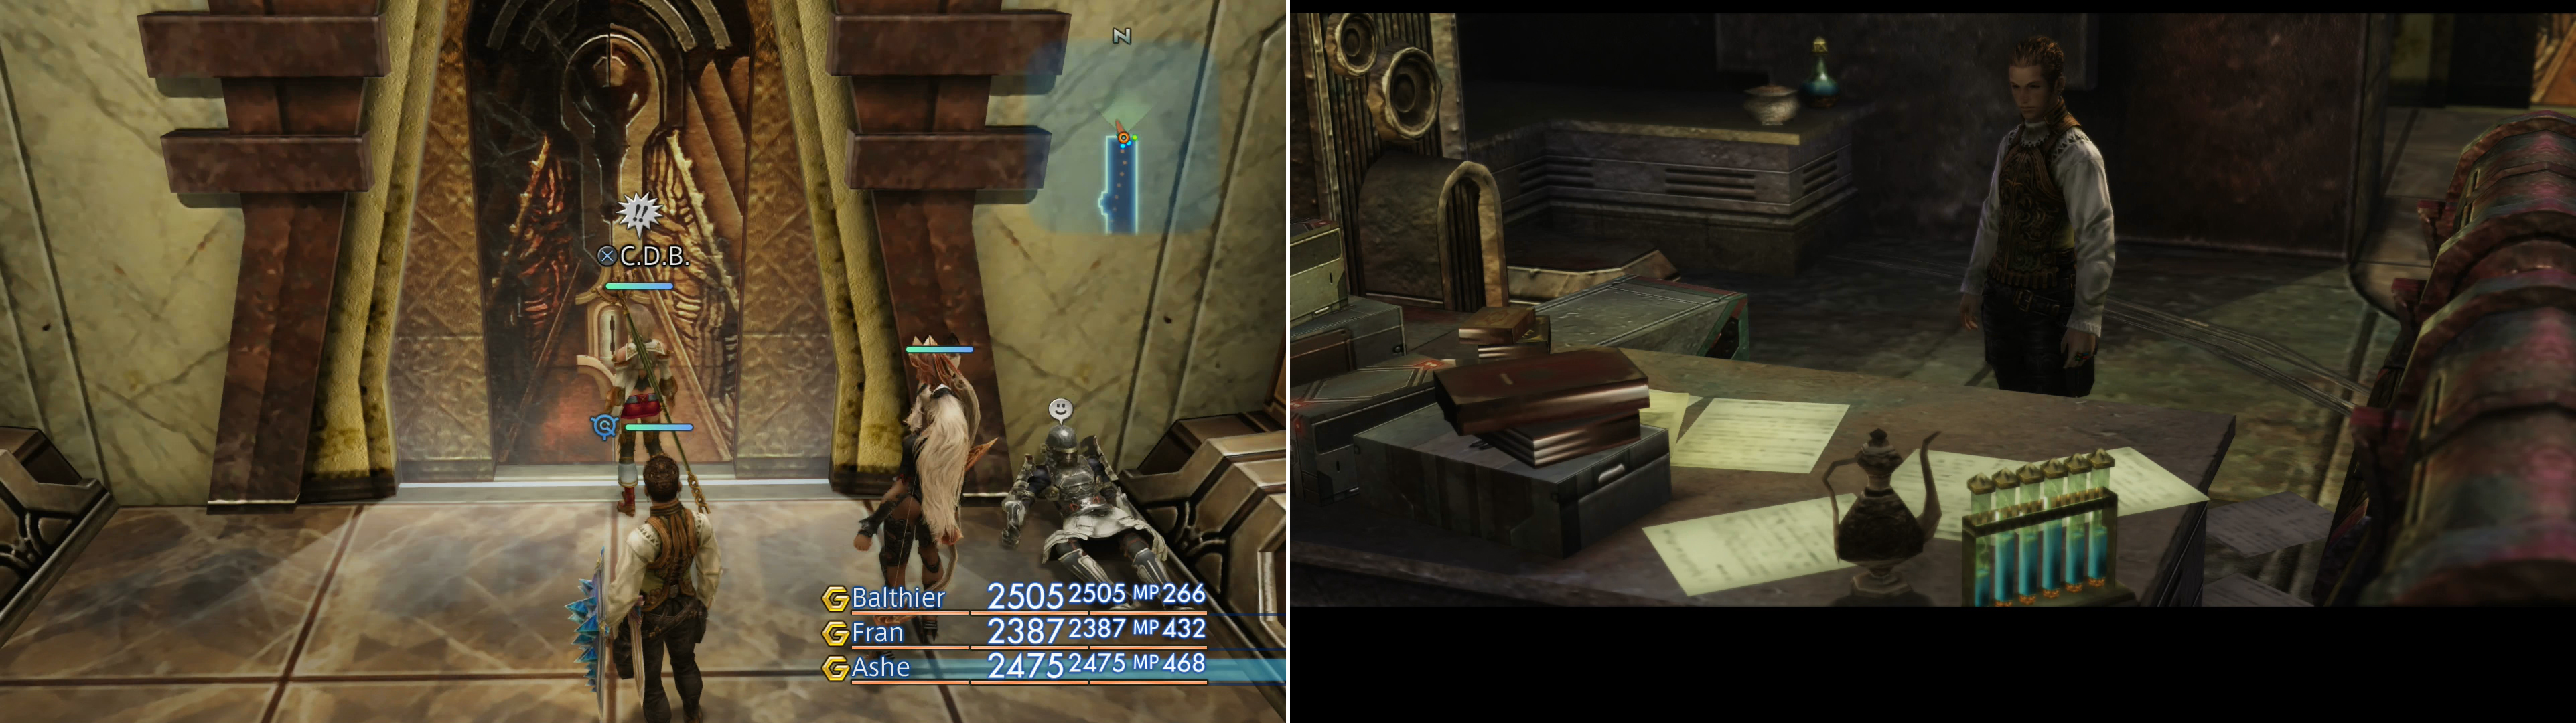 Locate the door to Doctor Cid's office (left) inside of which Balthier will find the Lab Access Card (right).